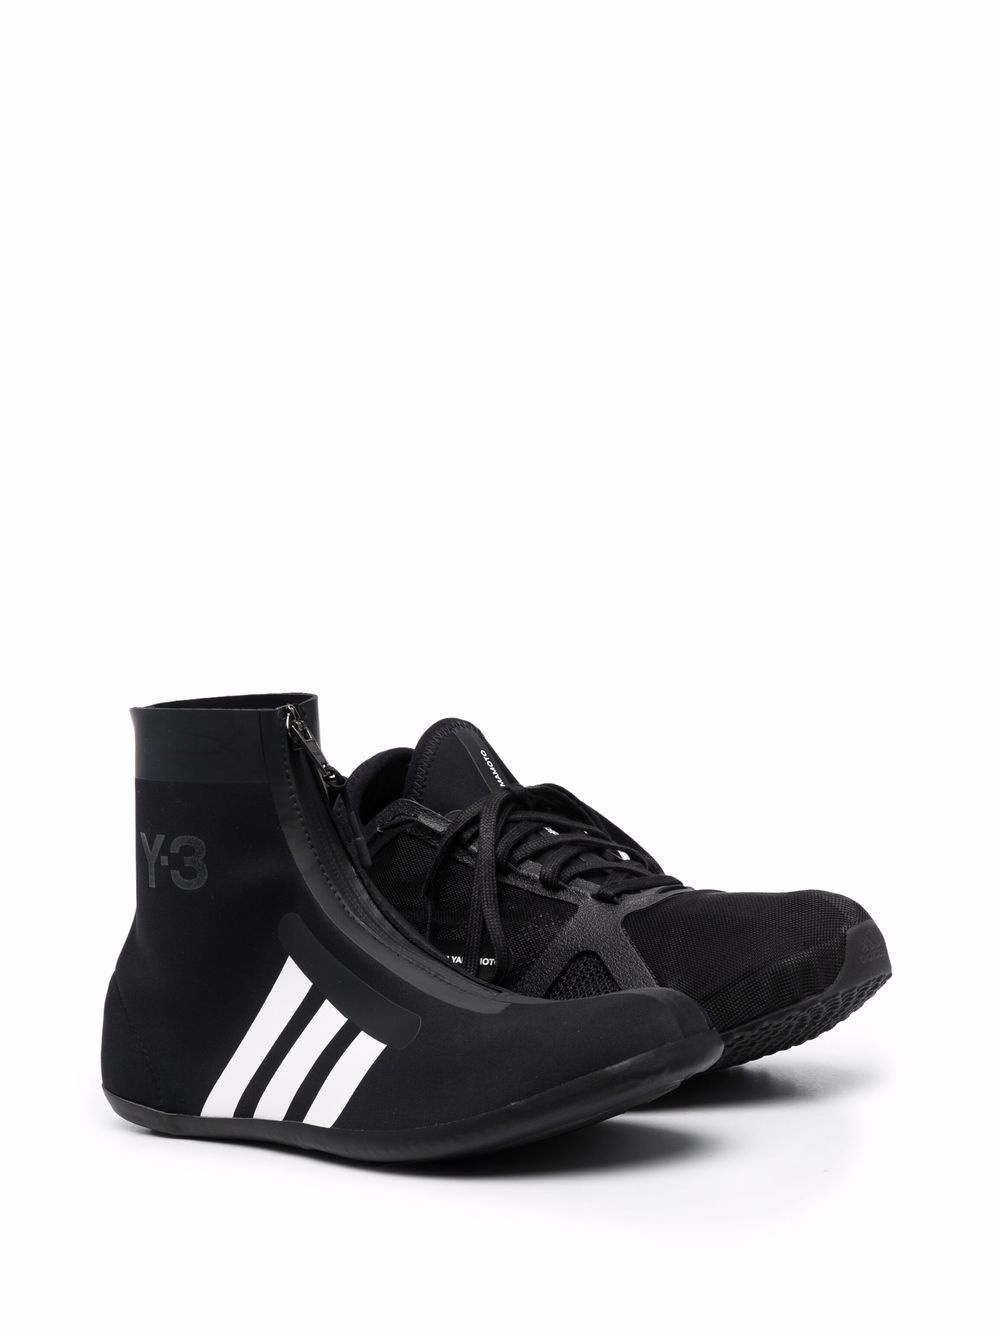 Y-3 runner 4D IOW trainers - 2